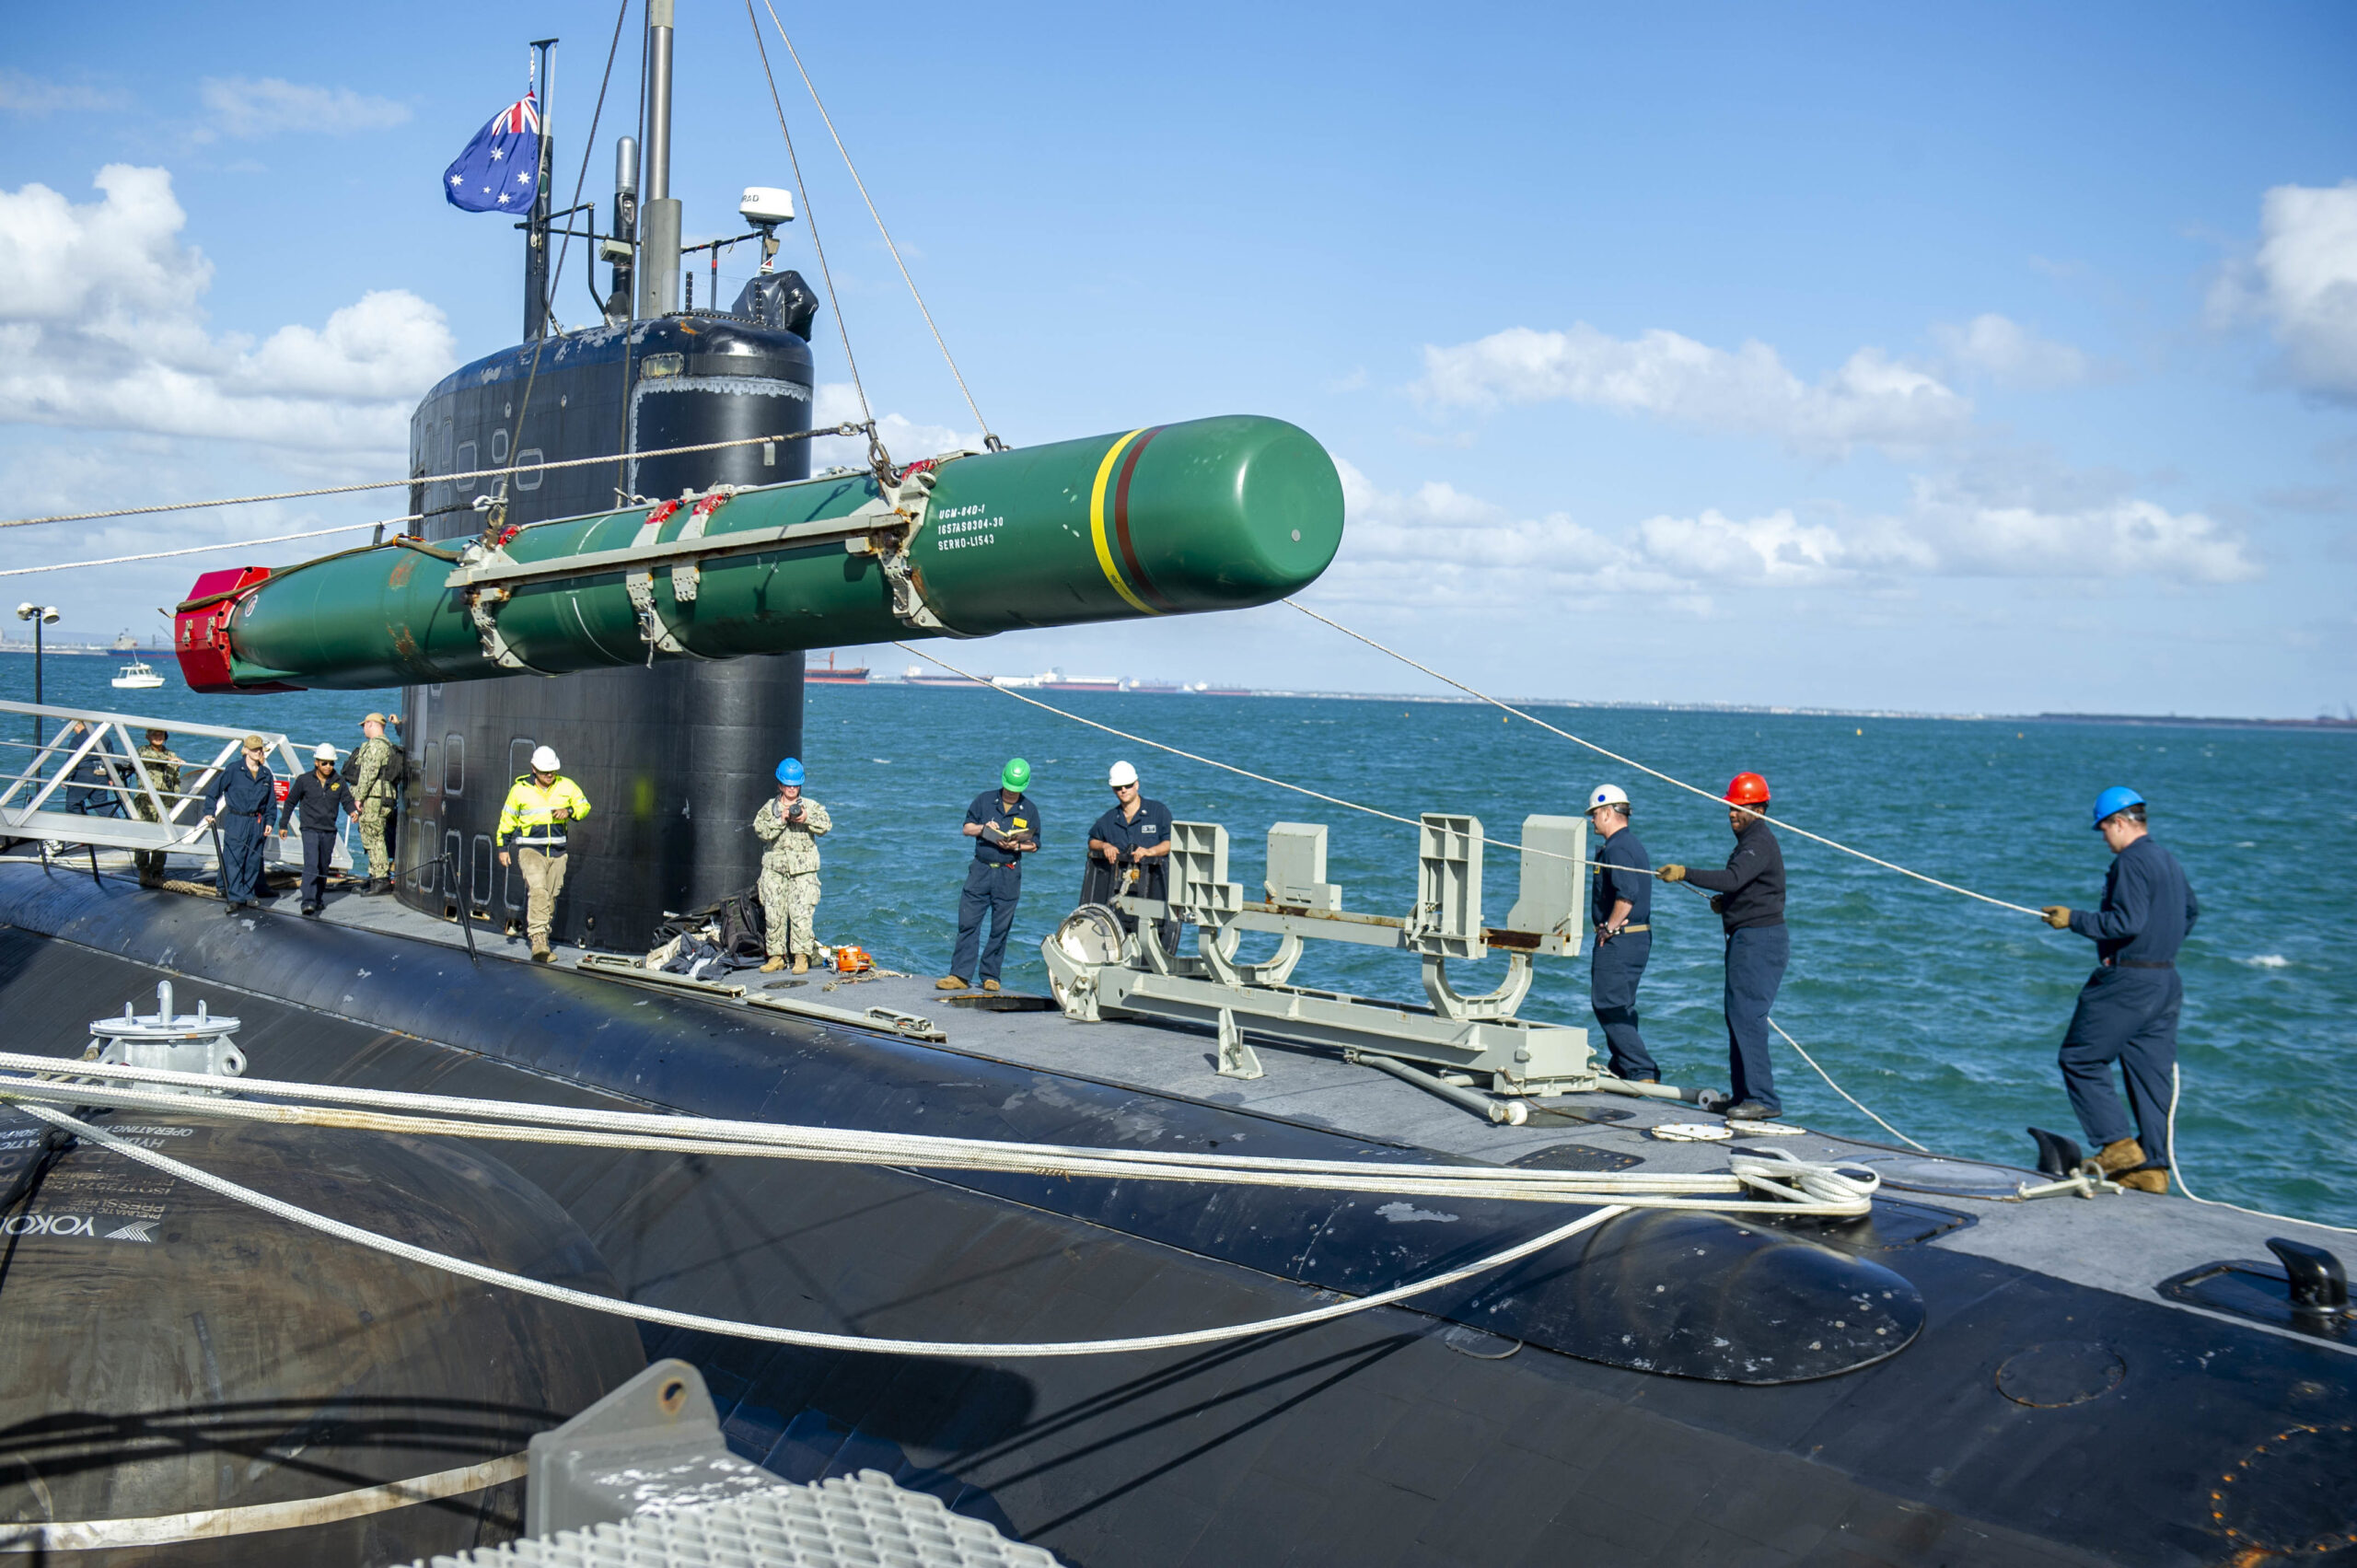 Sailors assigned to the <em>Los Angeles</em> submarine USS <em>Springfield</em> (SSN-761), participate in a weapons-handling exercise with a Harpoon inert training shape while the submarine is pierside at Royal Australian Navy base HMAS Stirling on Garden Island off the coast of Perth, Australia, April 28, 2022. <em>U.S. Navy photo by Mass Communication Specialist Seaman Wendy Arauz</em>